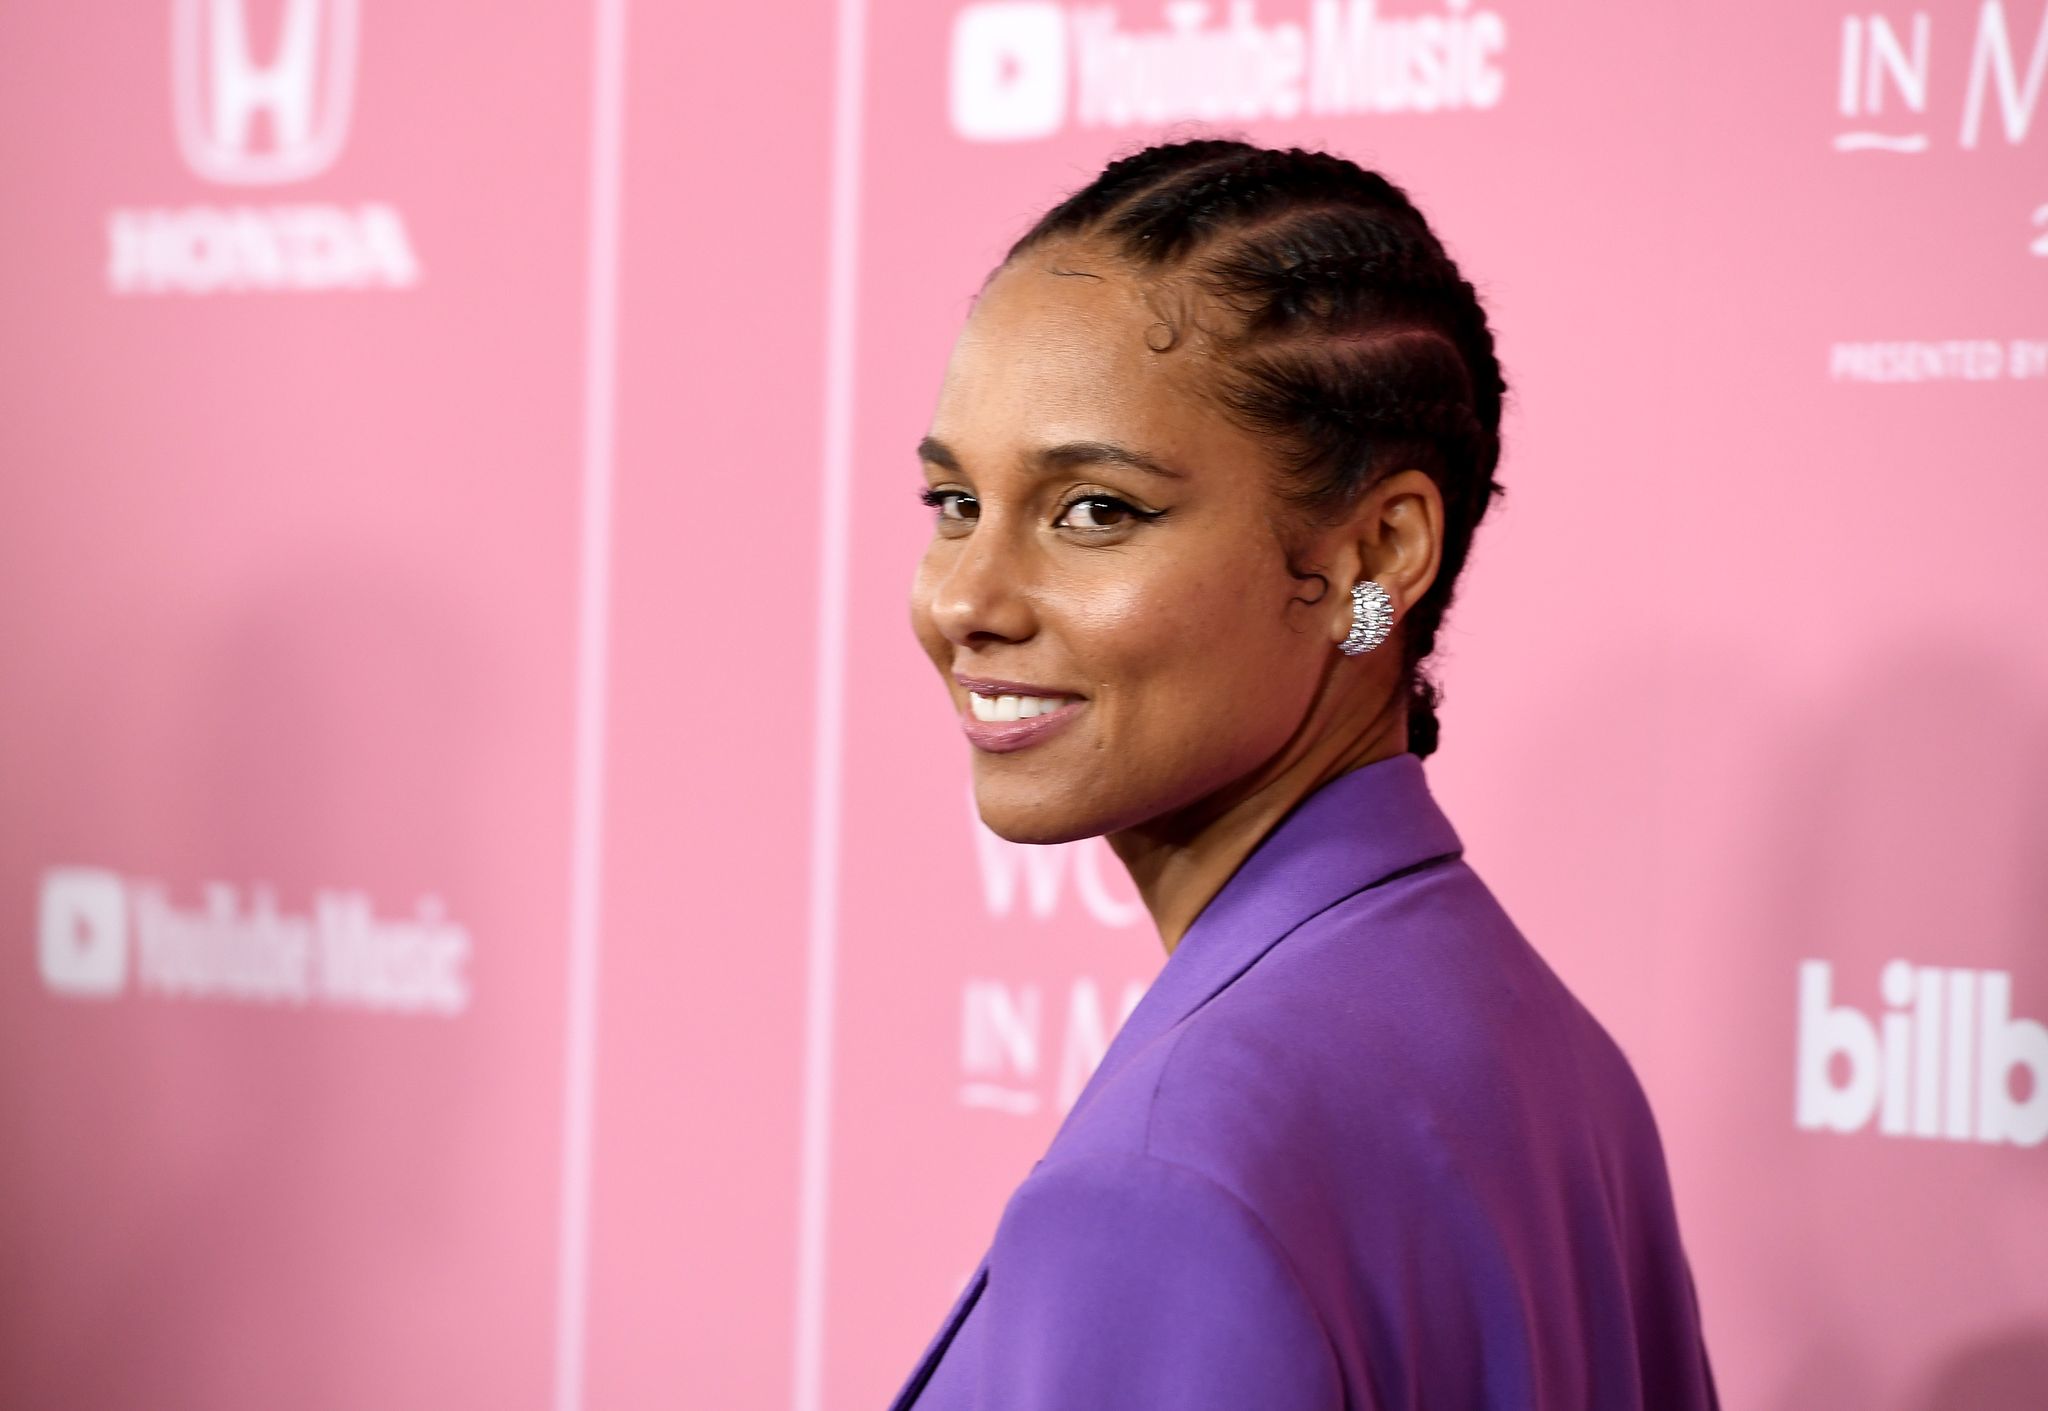 Alicia Keys Porn Videos - Alicia Keys: 'I want to make sure all the issues about race are addressed'  | Alicia Keys | The Guardian